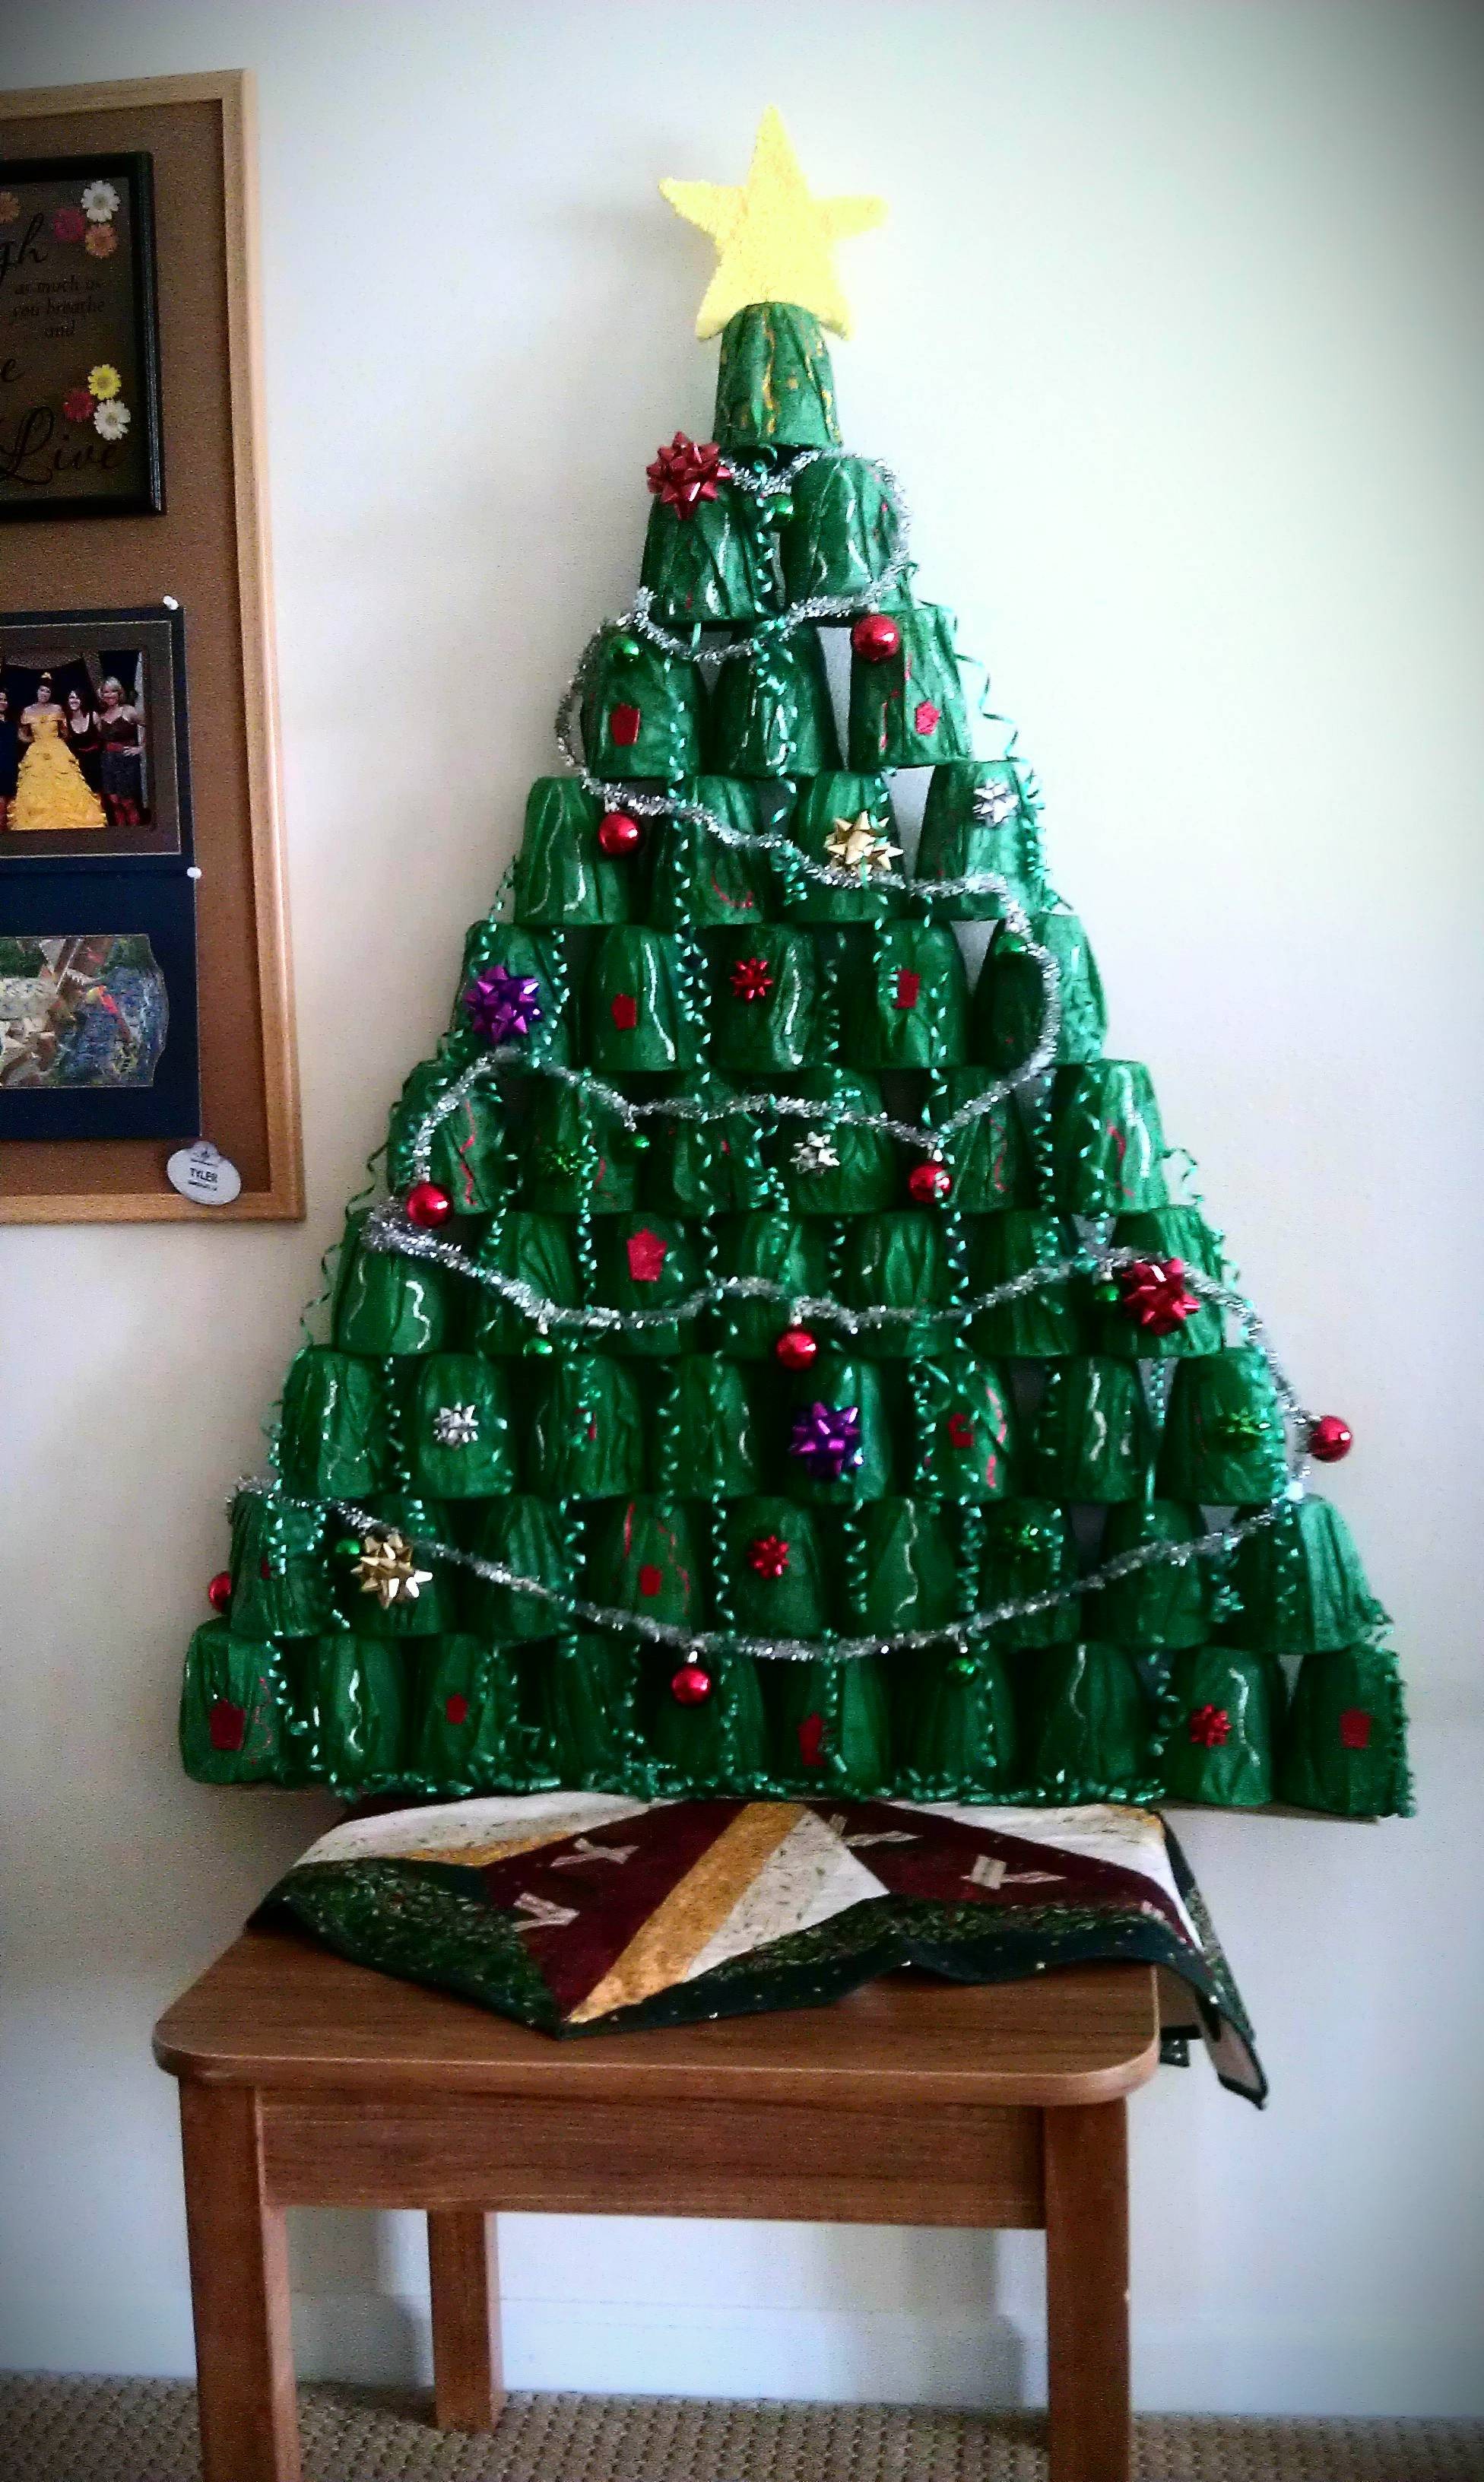 Papercraft Christmas Tree My Roomates and I Made A Christmas Tree Out Of Plastic Cups T